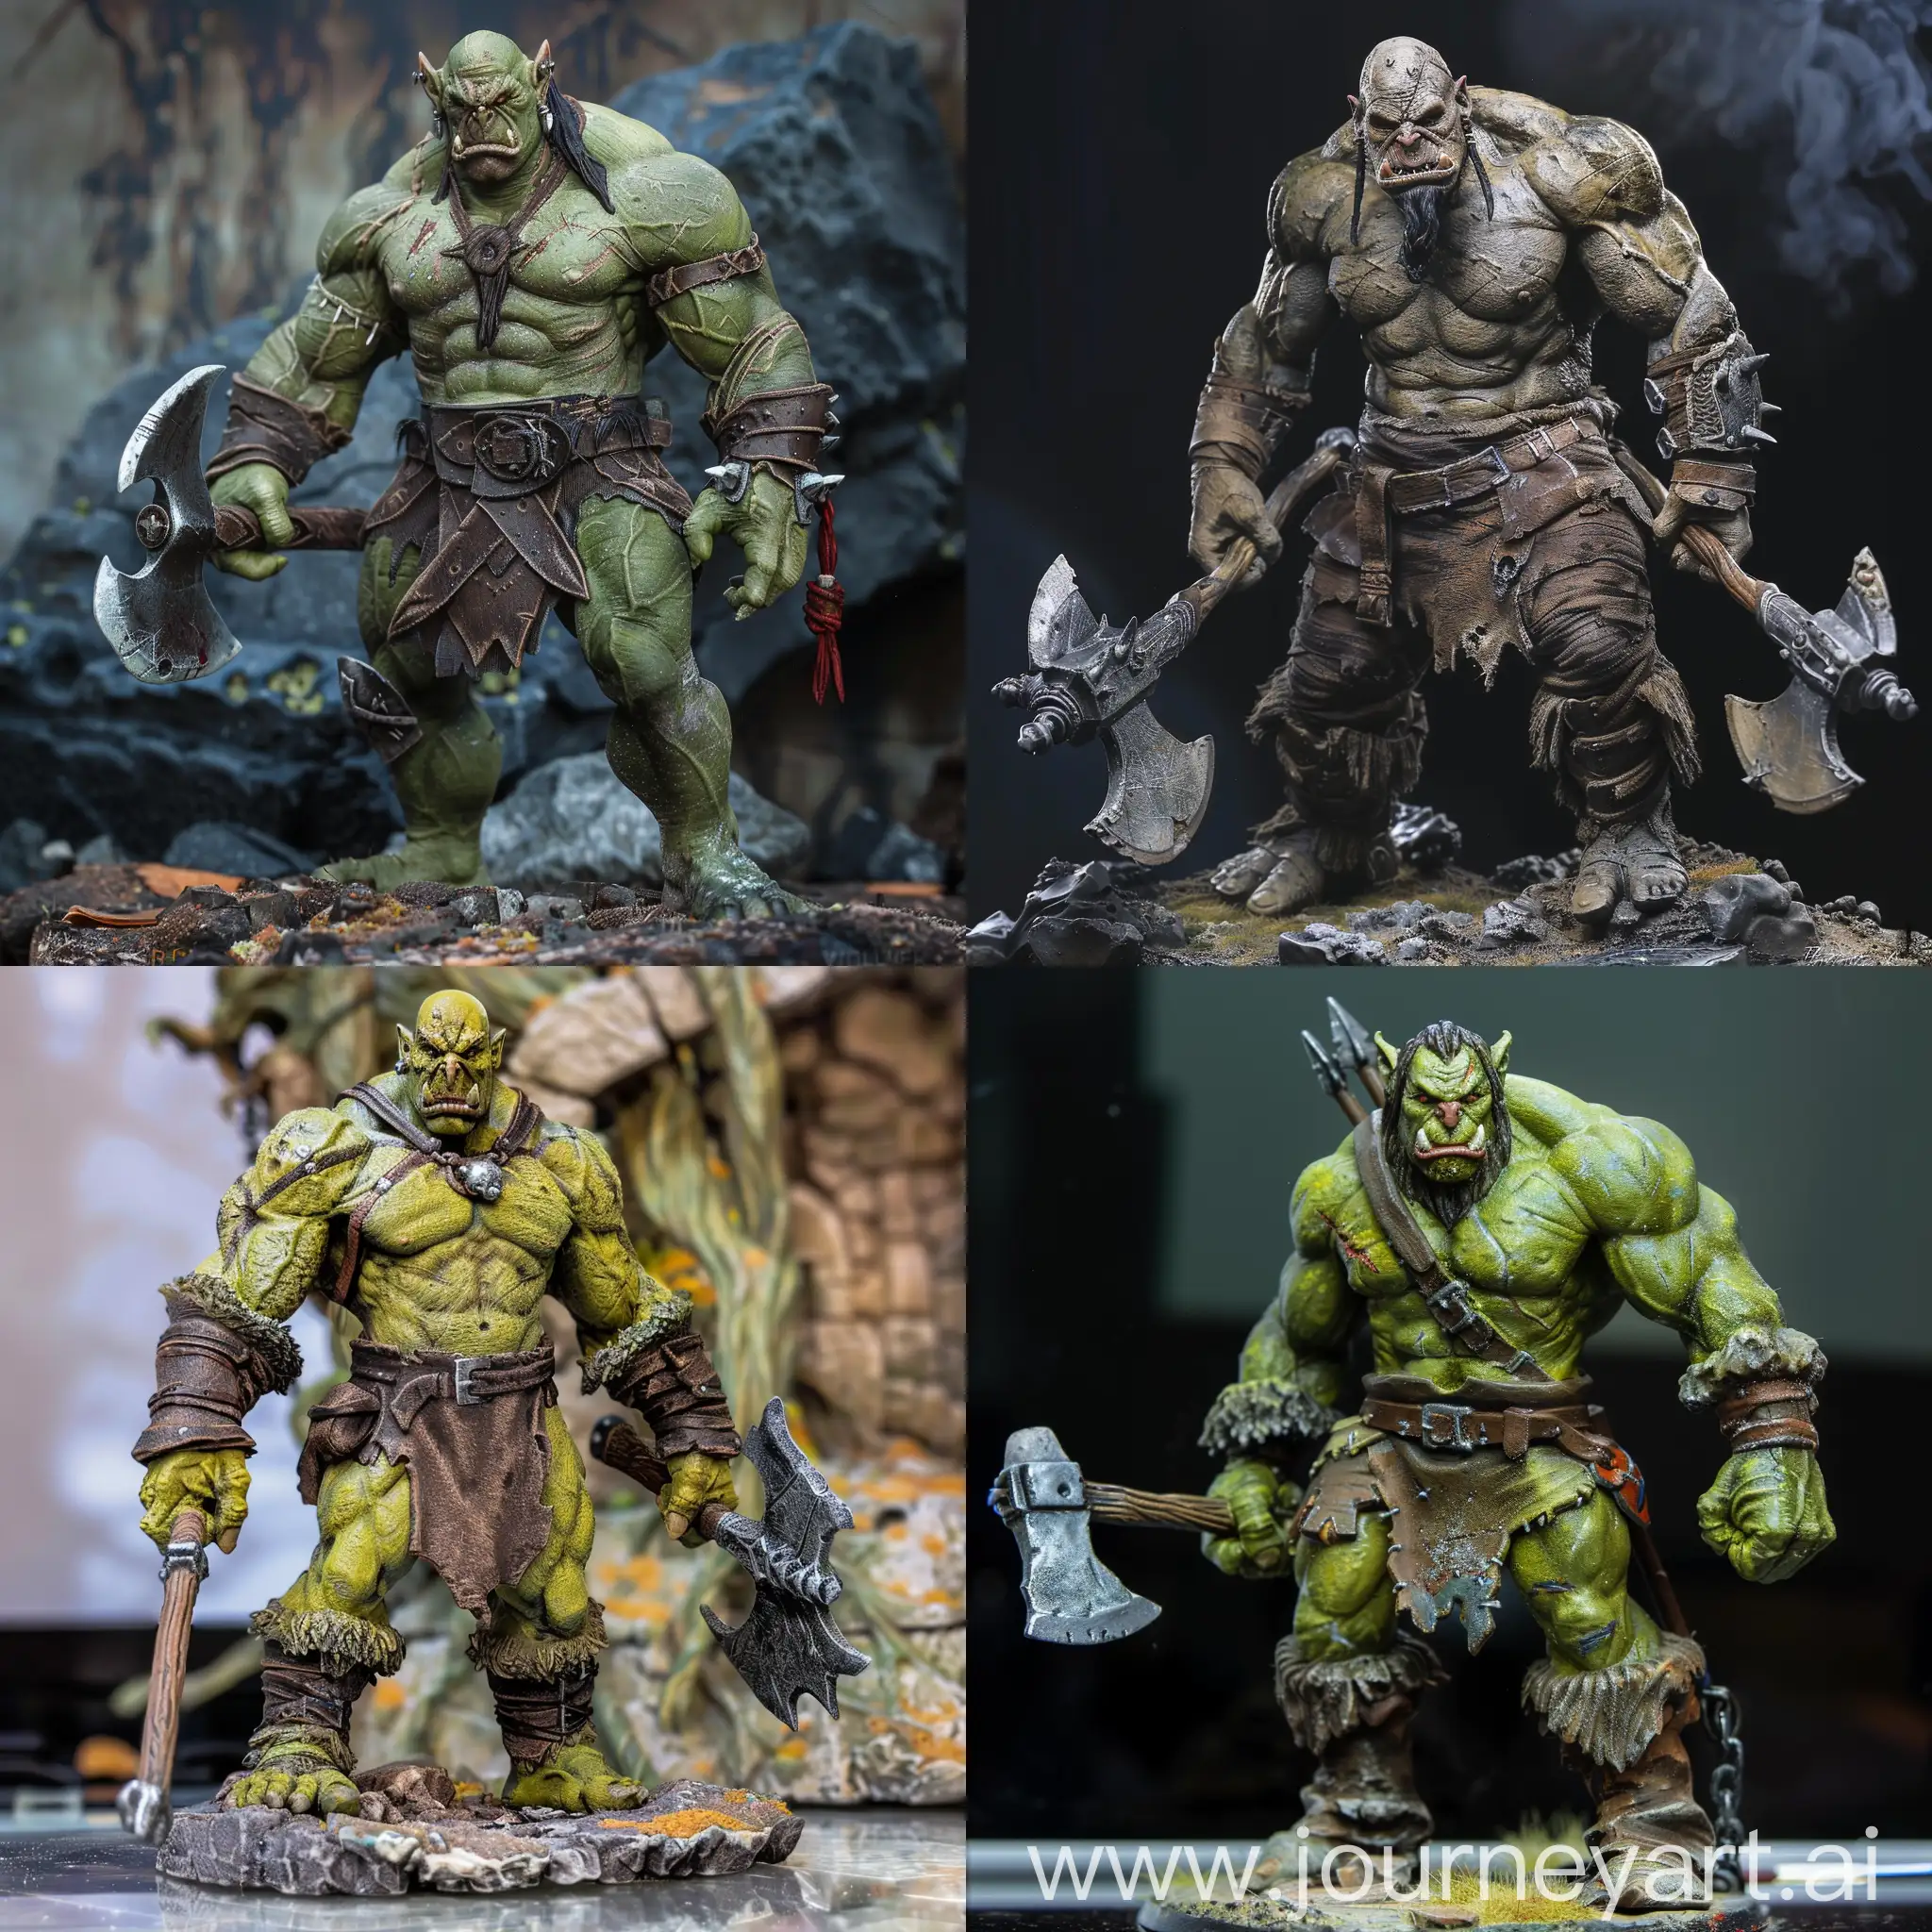 Orc, strong build, formidable appearance, 2 axes